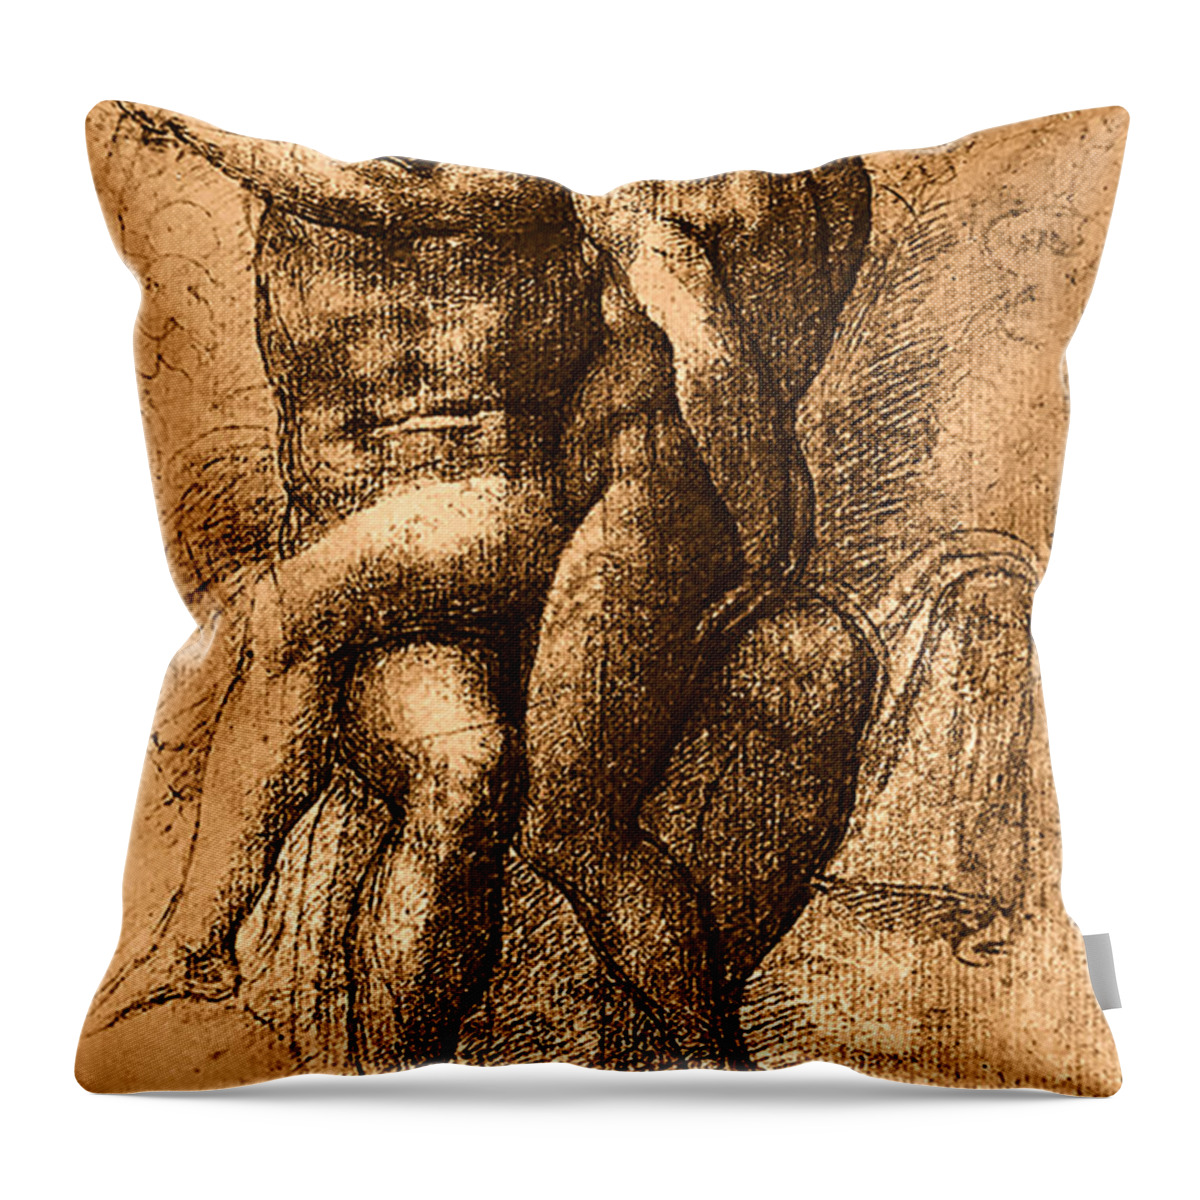 Nude Study Number One Throw Pillow featuring the painting Nude Study Number One by Michelangelo Buonarroti